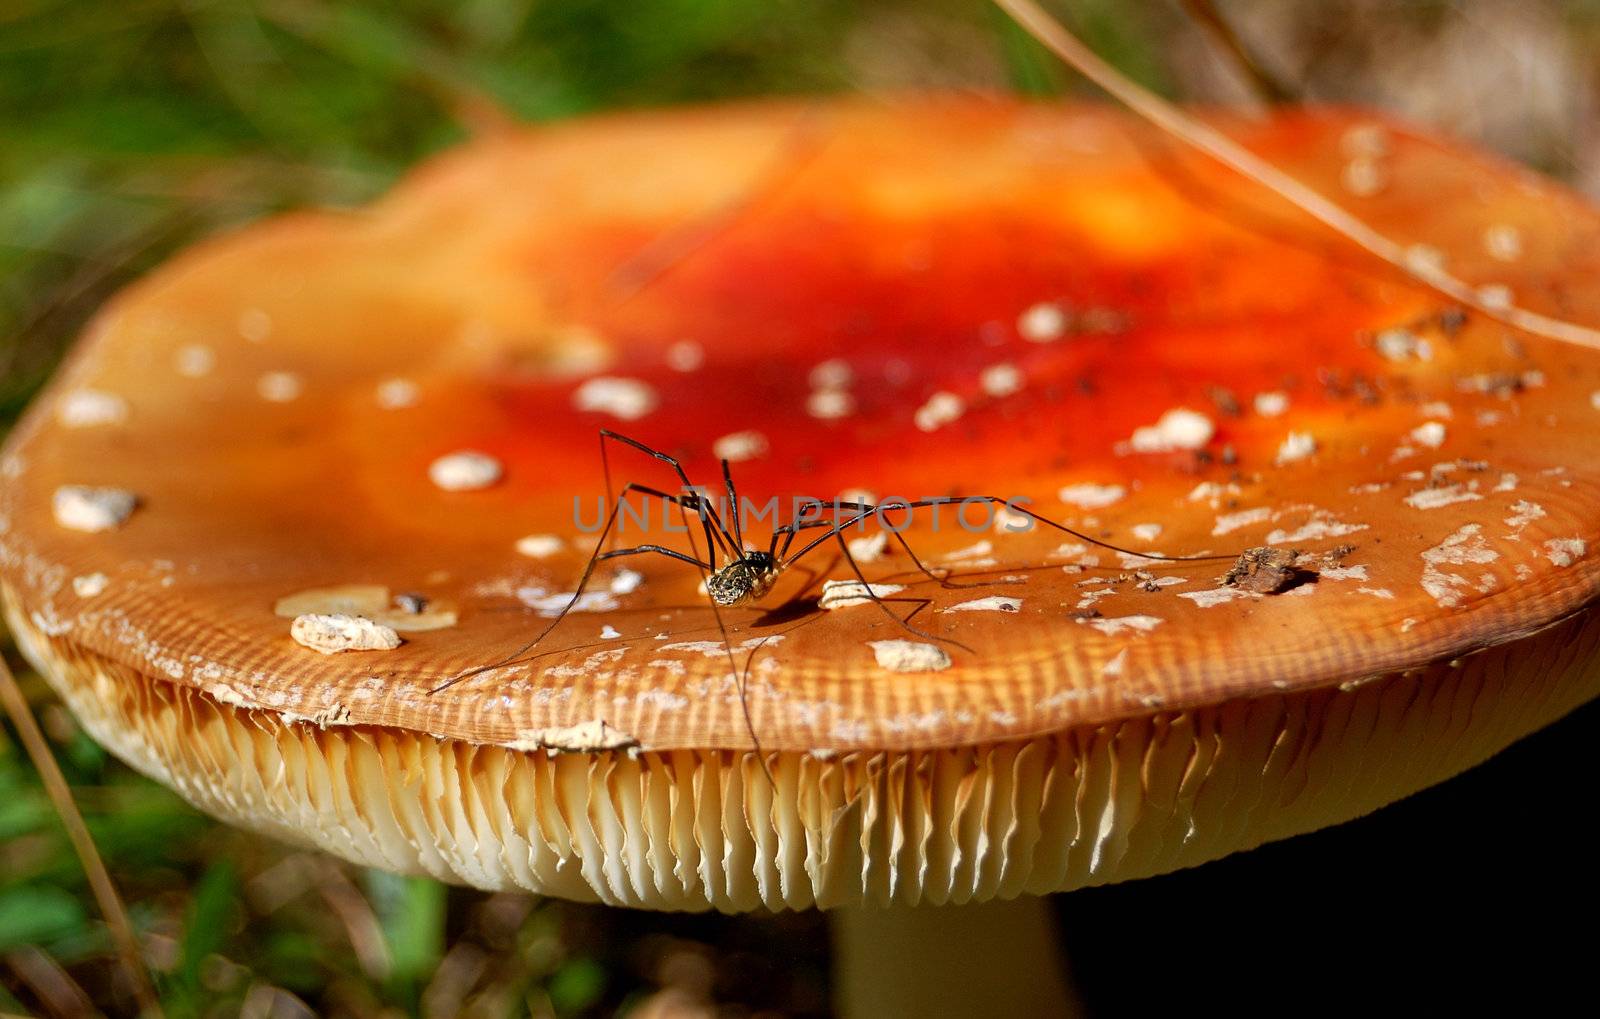 A spider is walking over a dried mushroom (Amanita Muscaria) in autumn .